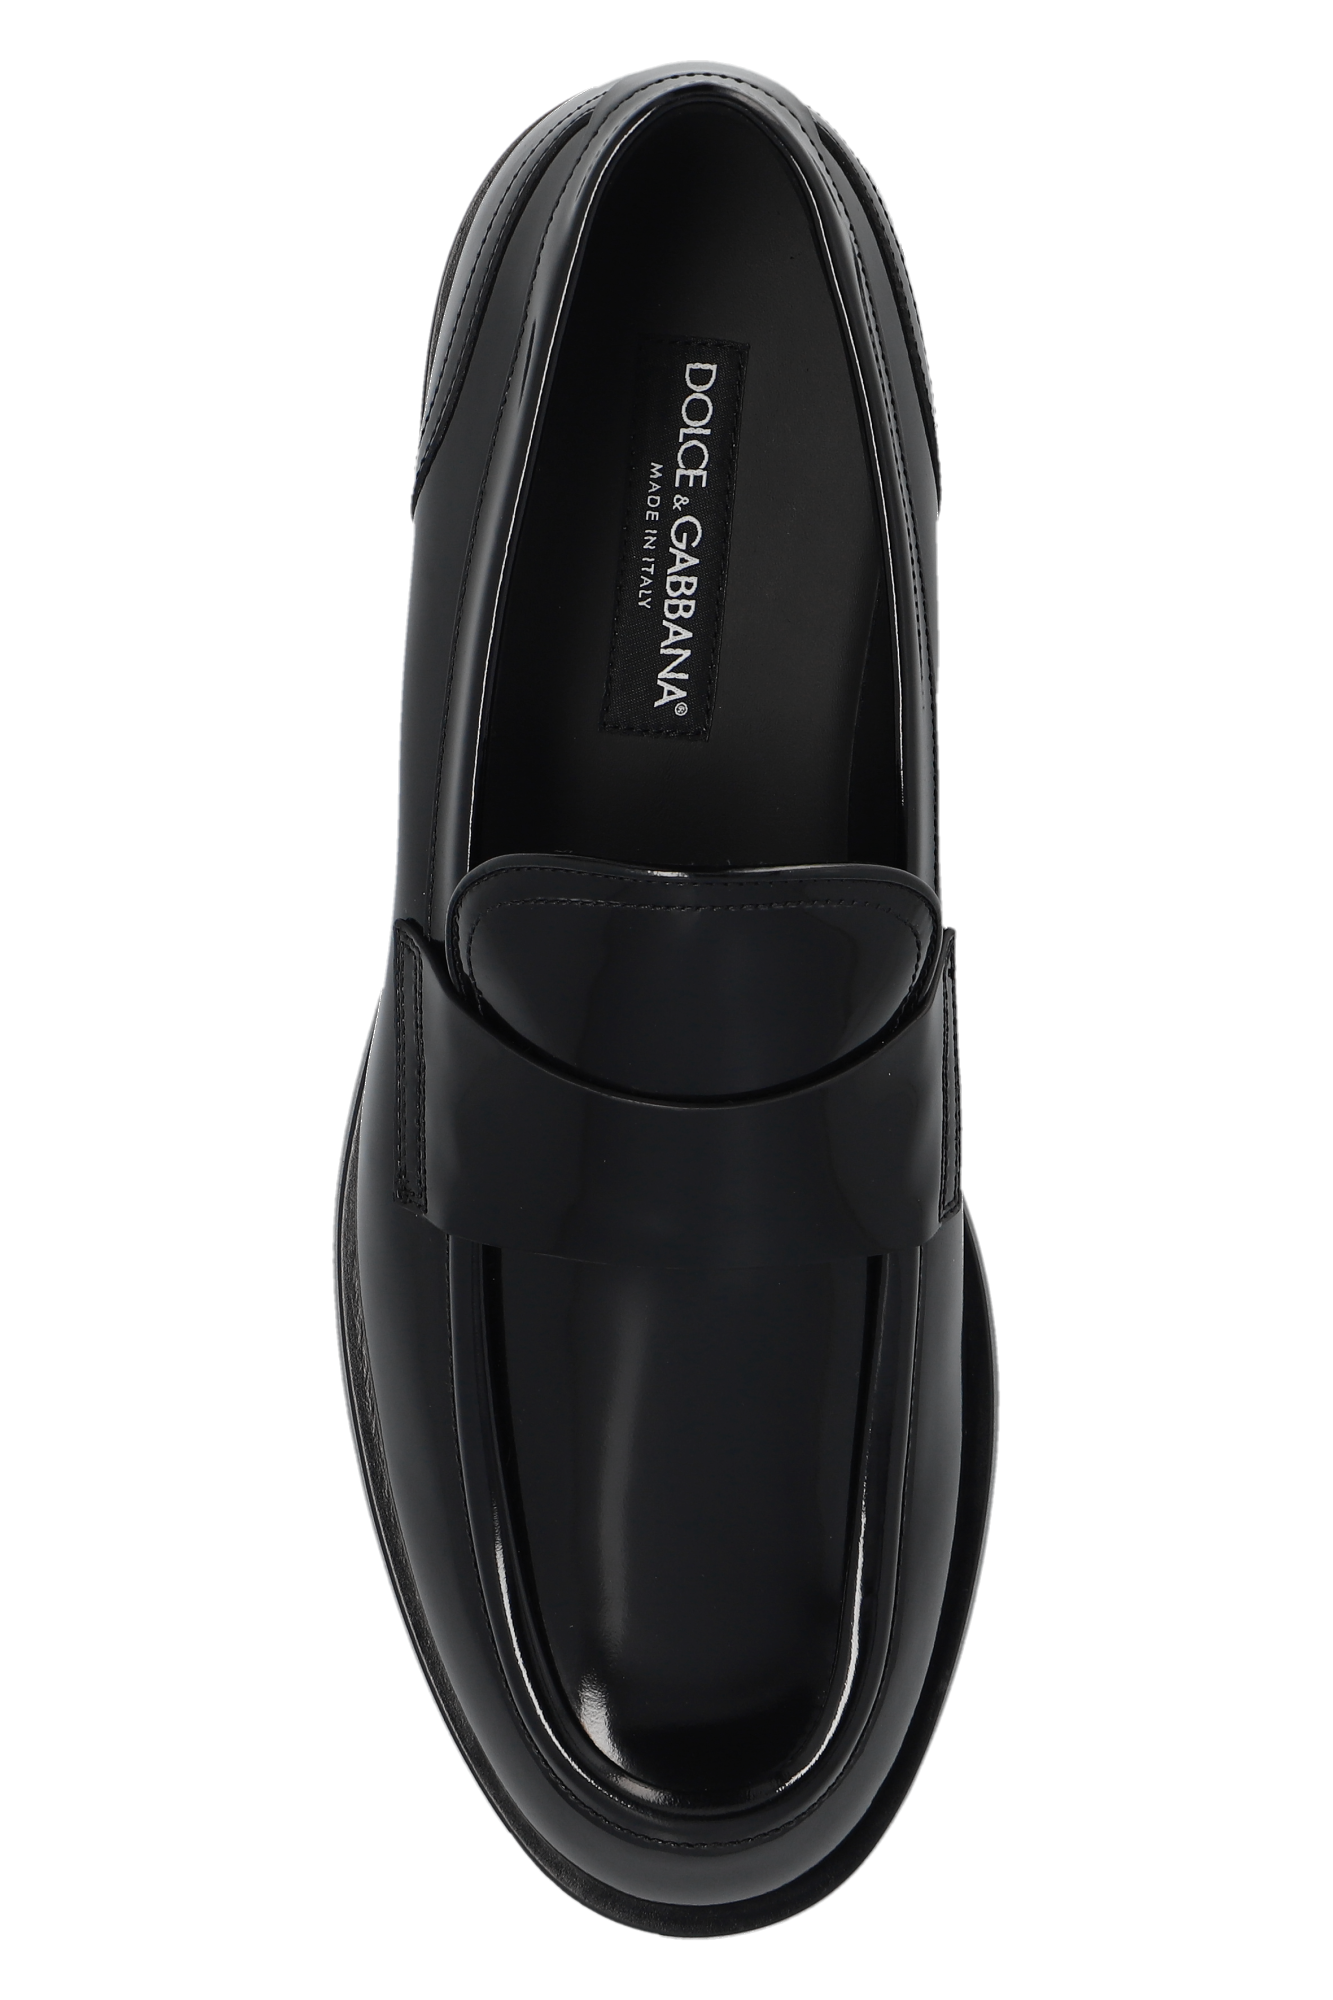 Dolce & Gabbana Devotion iPhone 11 Pro cover Patent leather loafers